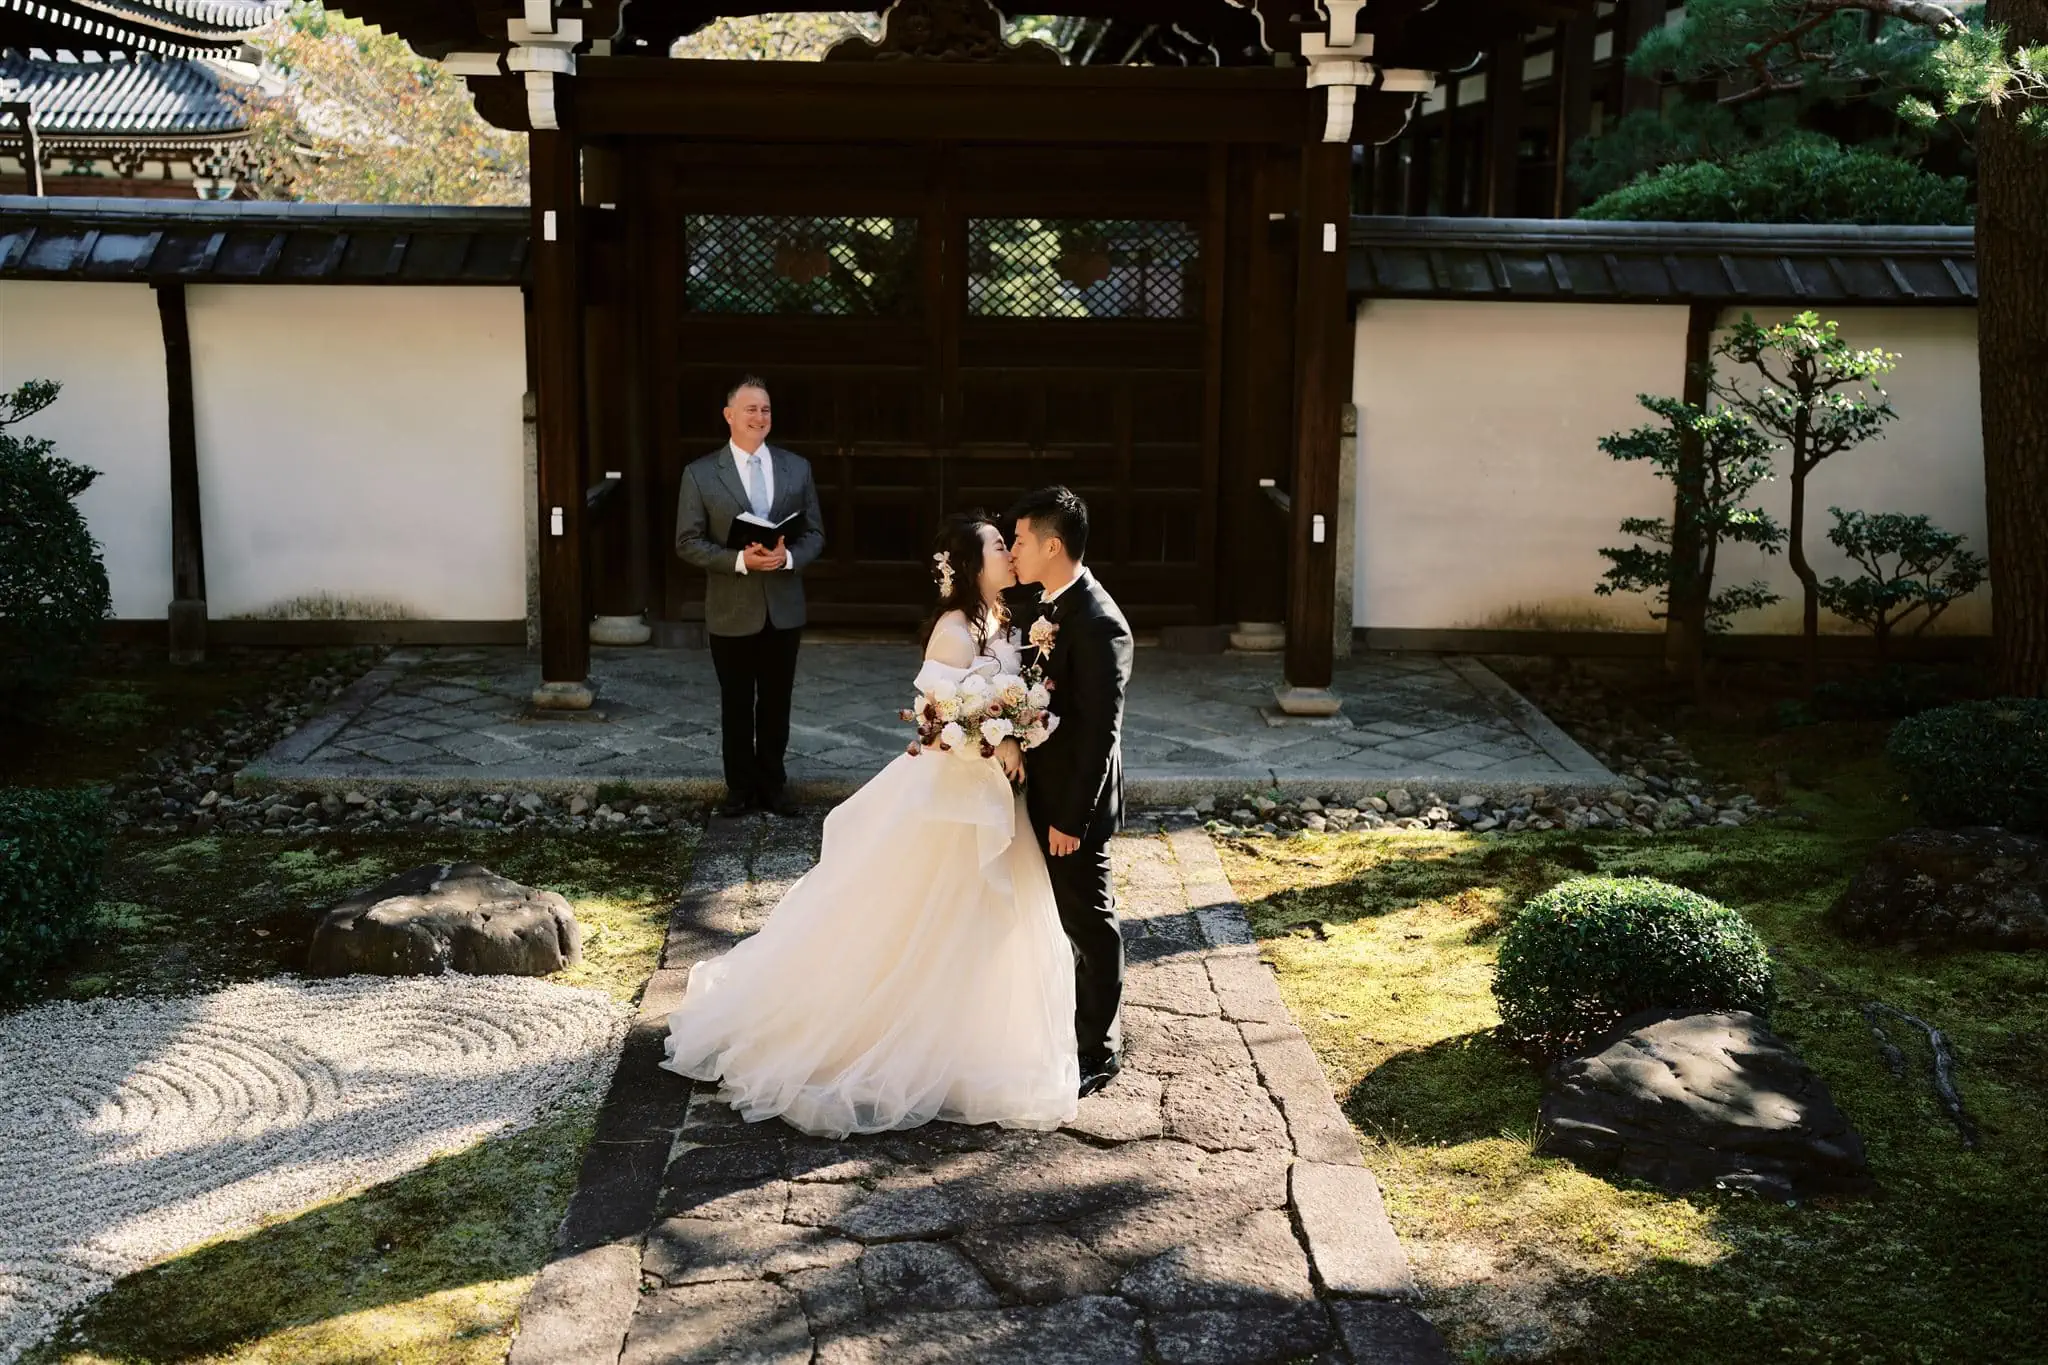 Kyoto Tokyo Japan Elopement Wedding Photographer, Planner & Videographer | A Japan elopement photographer captures a bride and groom standing in front of a stunning Japanese garden.